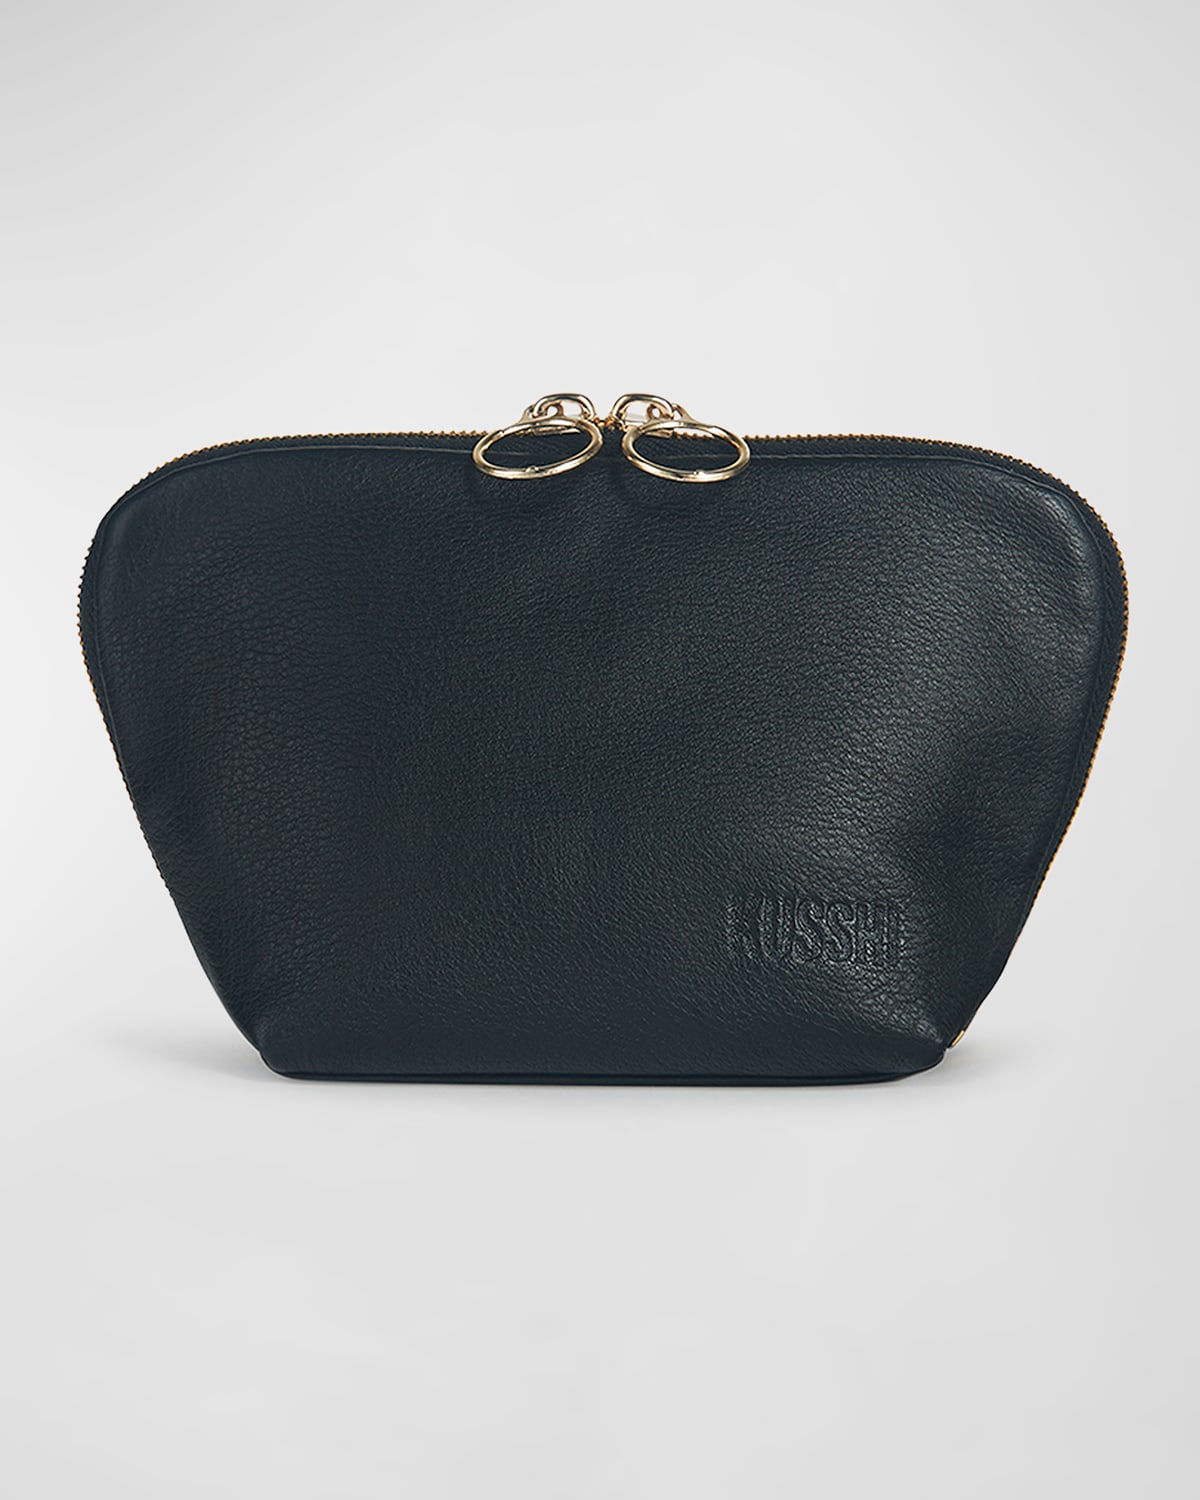 Kusshi Everyday Leather Makeup Bag In Black/cool Grey